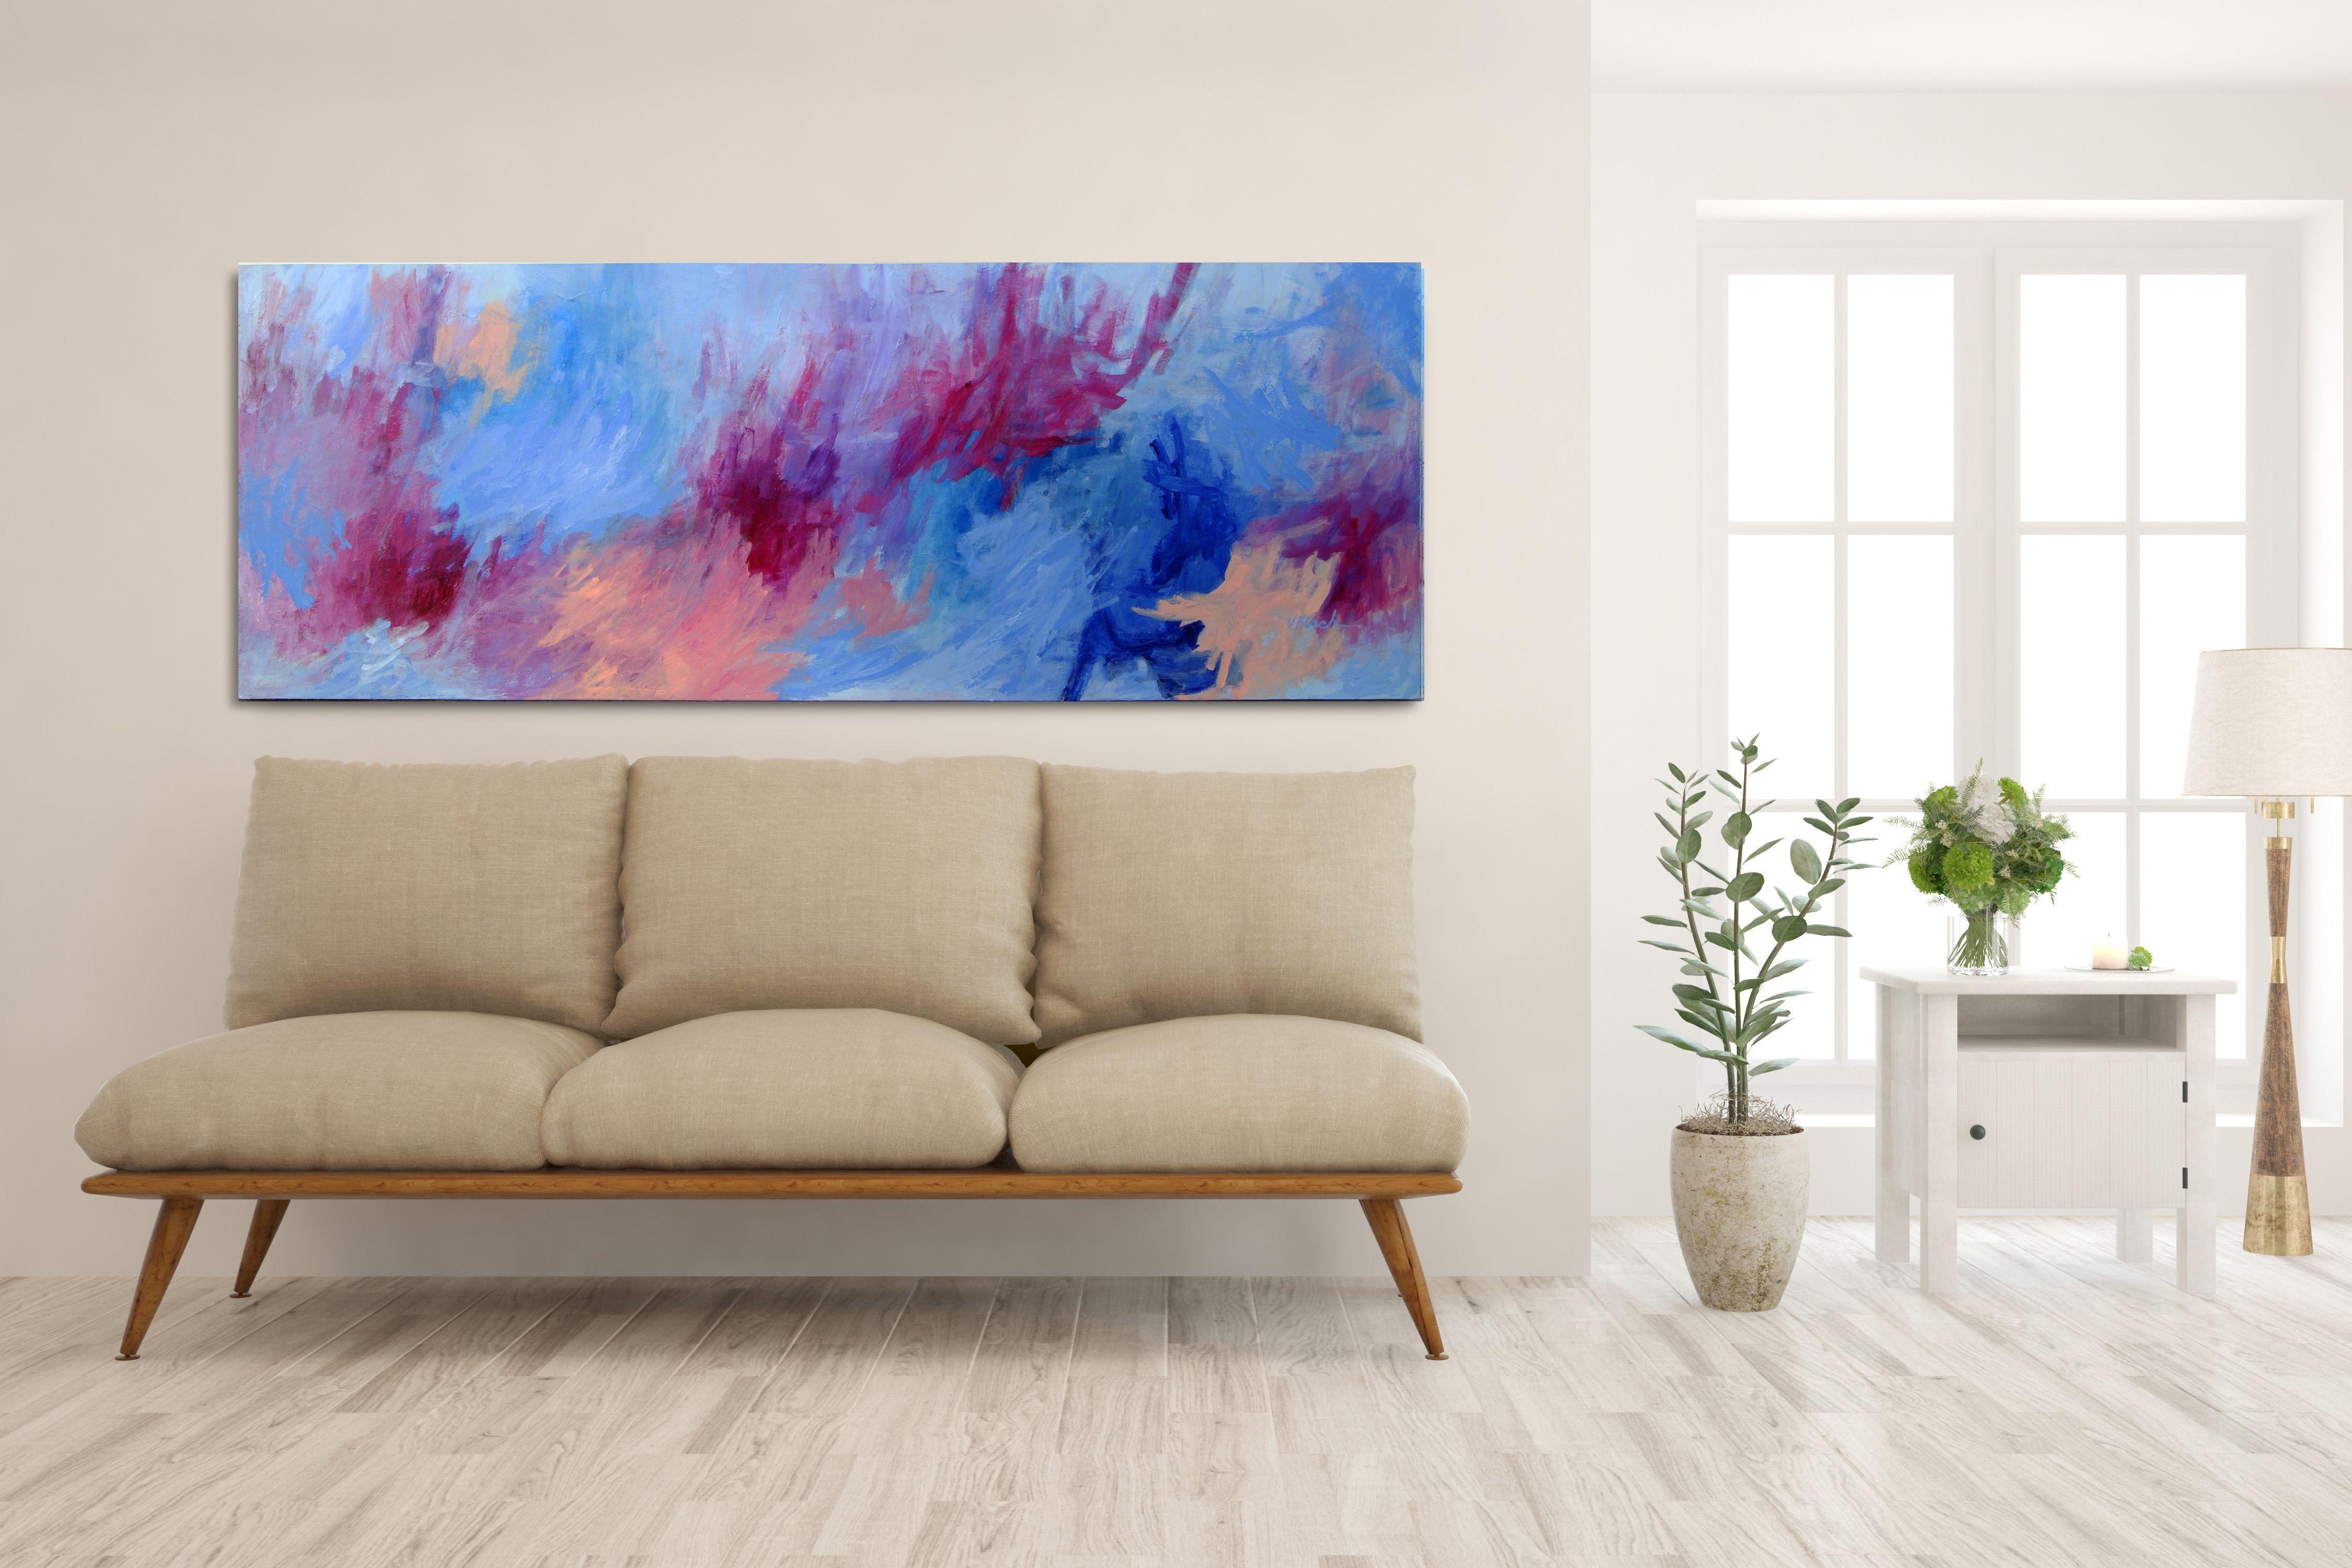 Coral Reef, the painting itself measures approx. 72"x26". The total piece has gesso primed borders for framing bring the total measurement to 82 x 32 (unframed).    Original, Modern, Life on the ocean floor.  Striking, rich color of movement.  In